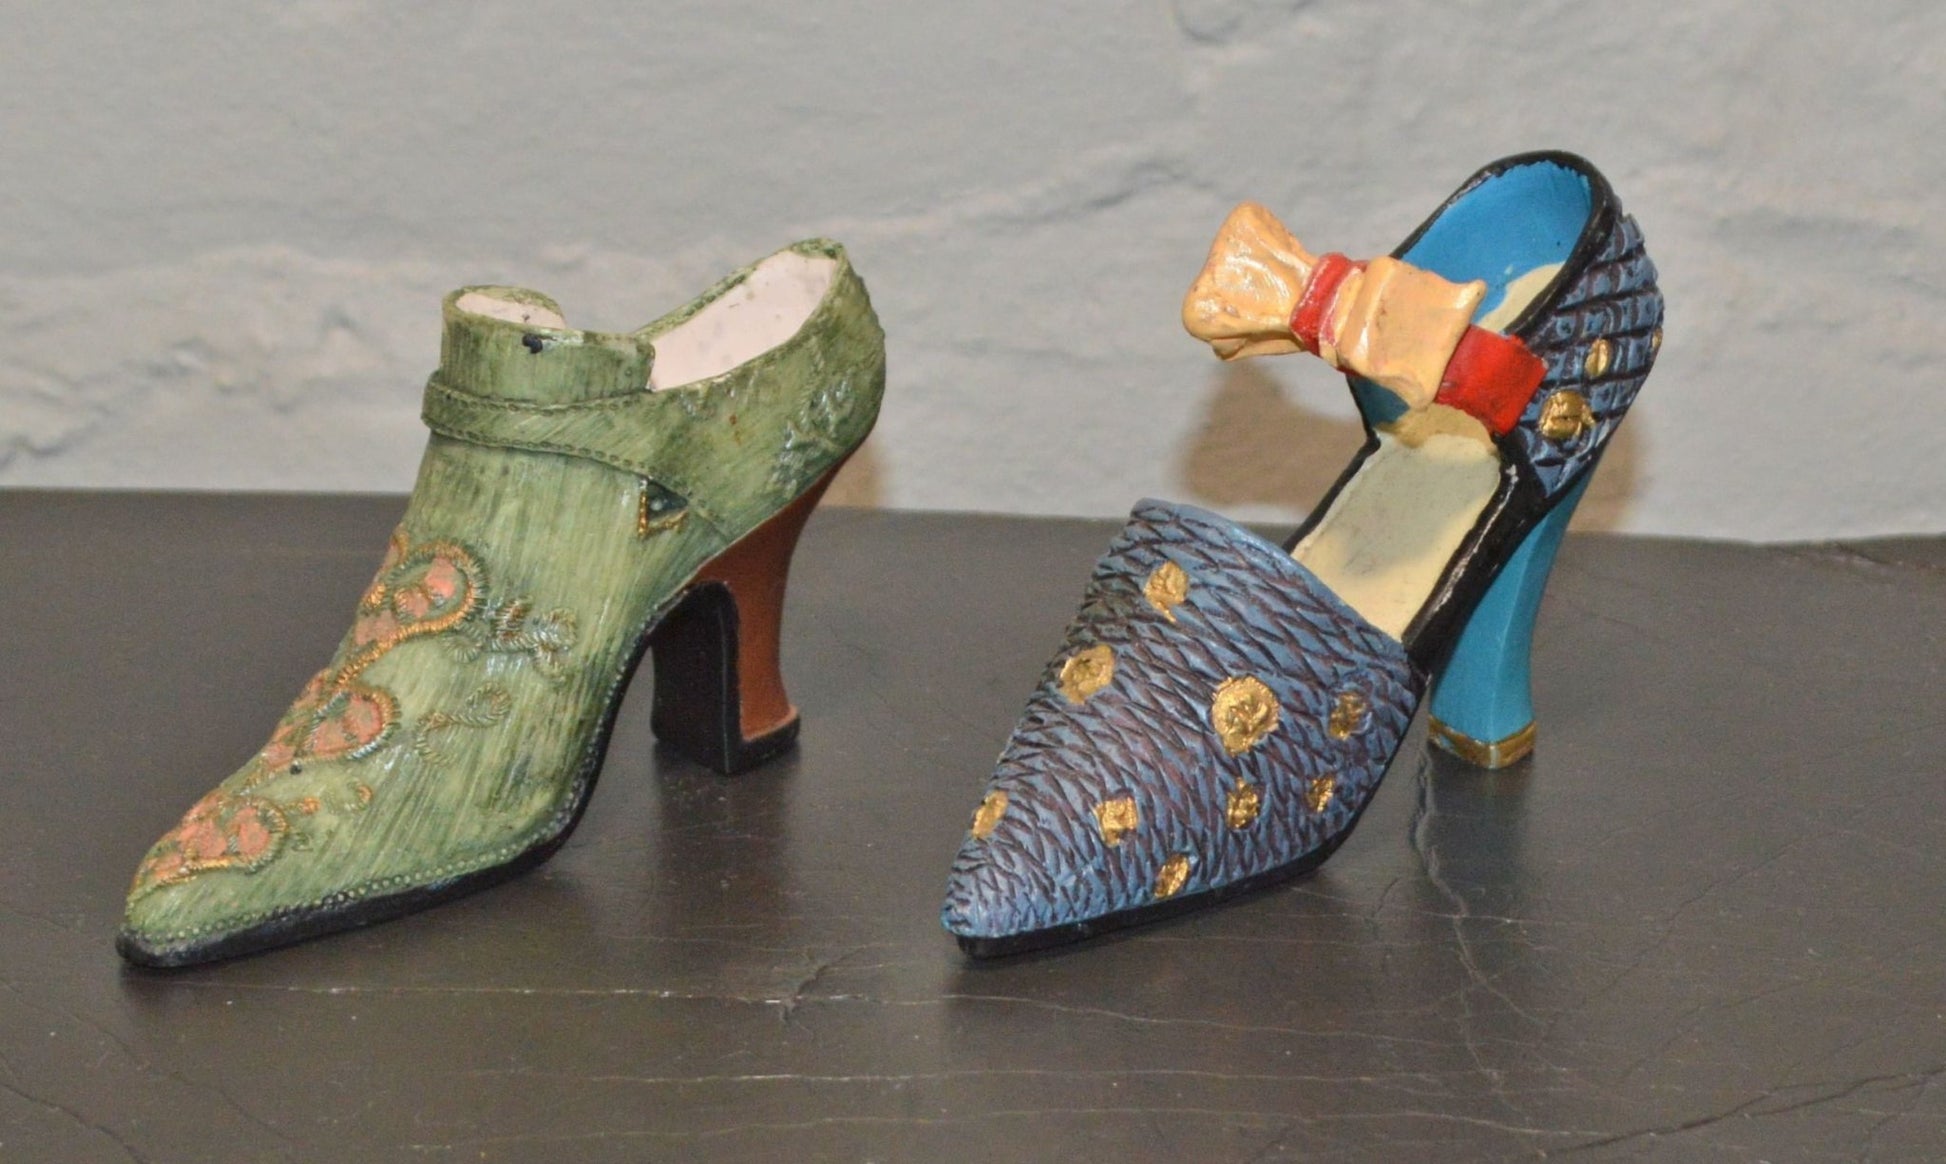 COLLECTION OF FOUR ORNAMENTAL SHOES AND TWO ORNAMENTAL BOOTS(PREVIOUSLY OWNED) GOOD CONDITION - TMD167207